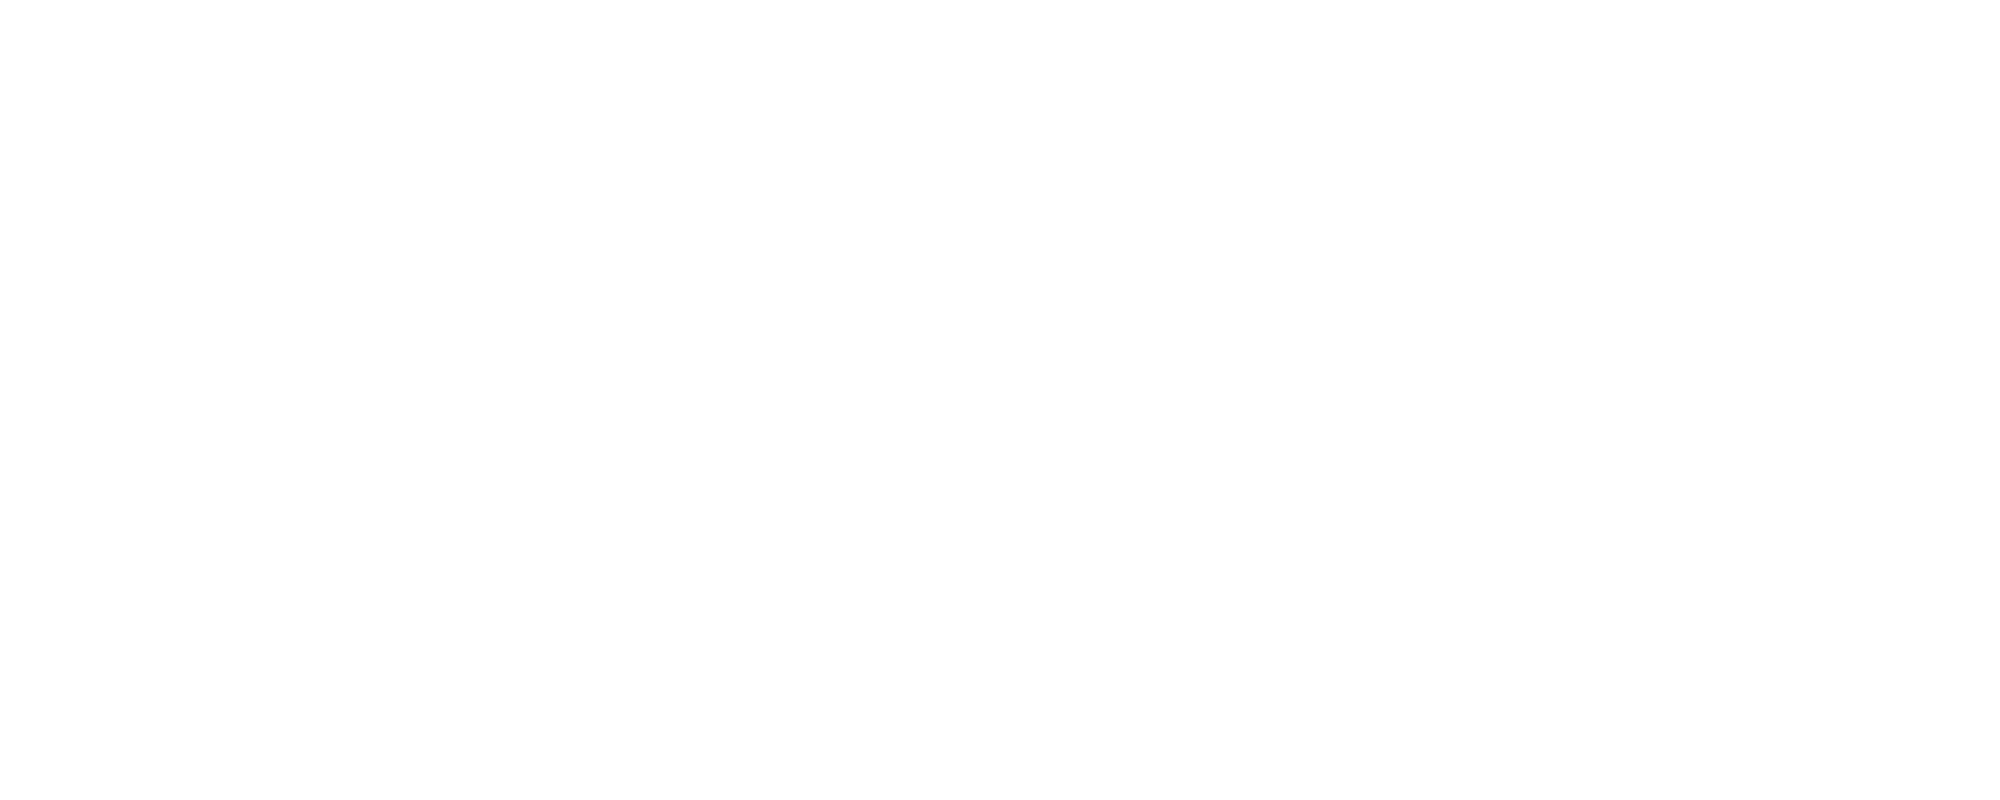 OVATION TV PUT $1 MILLION BEHIND COVID RELIEF FOR ARTS SECTOR IN 2020, PLEDGES TO CONTINUE INVESTMENT NEXT YEAR BY OFFERING STRUGGLING ORGANIZATIONS FREE AIRTIME